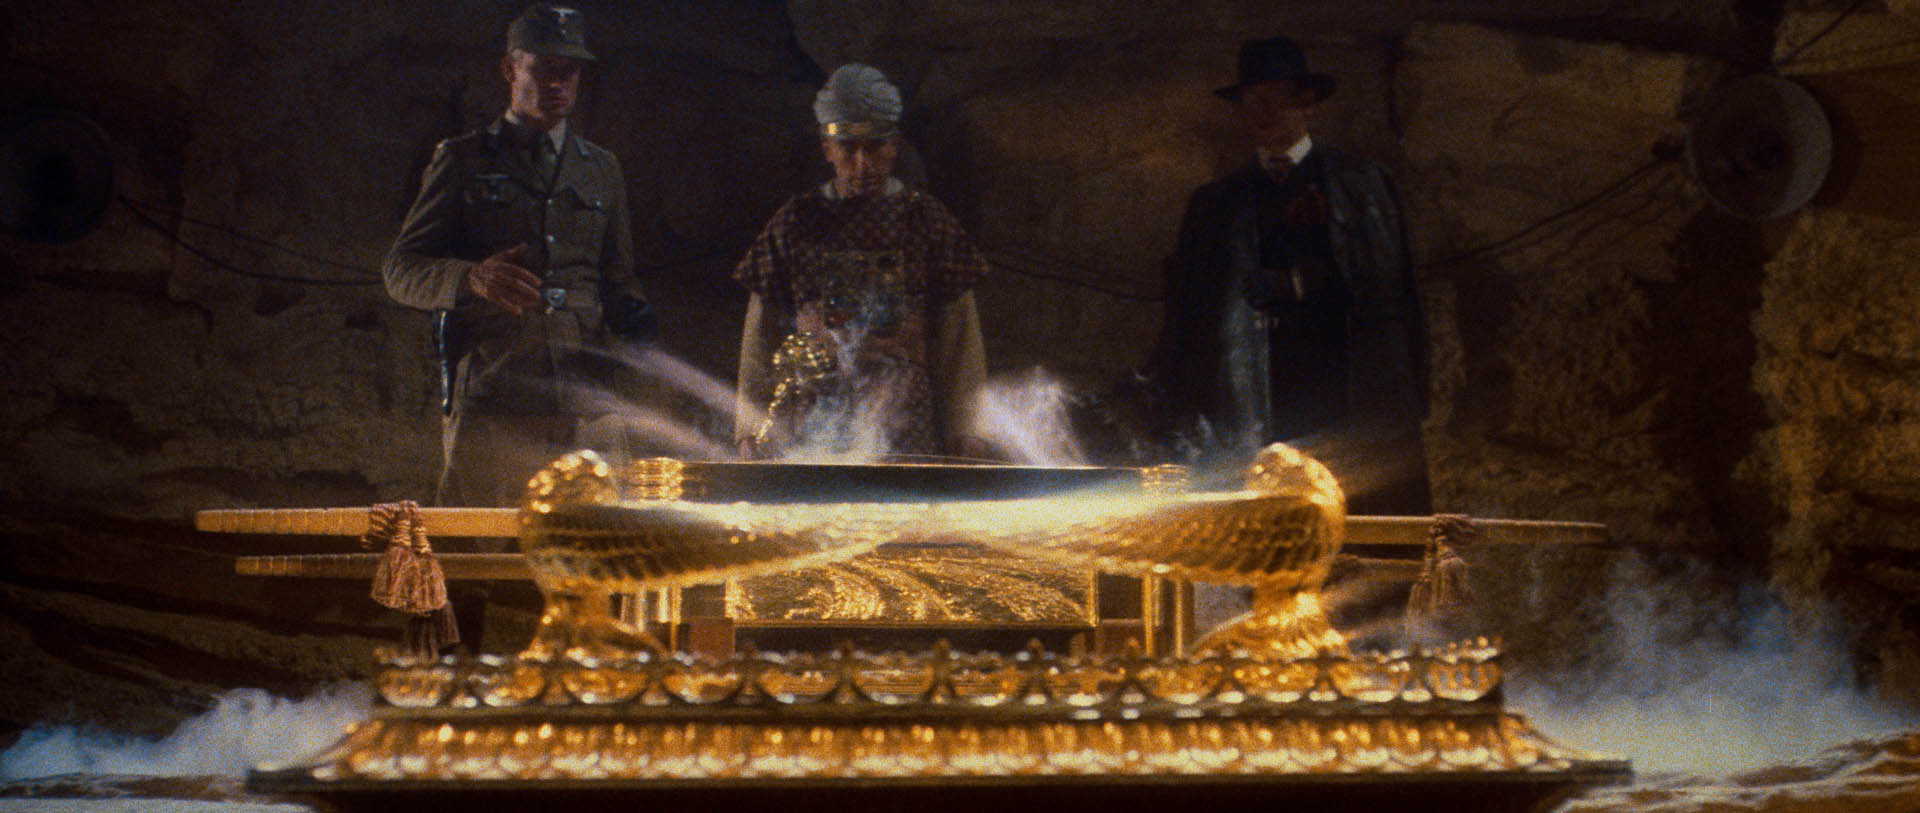 The ark in Indiana Jones and the Raiders of the Lost Ark